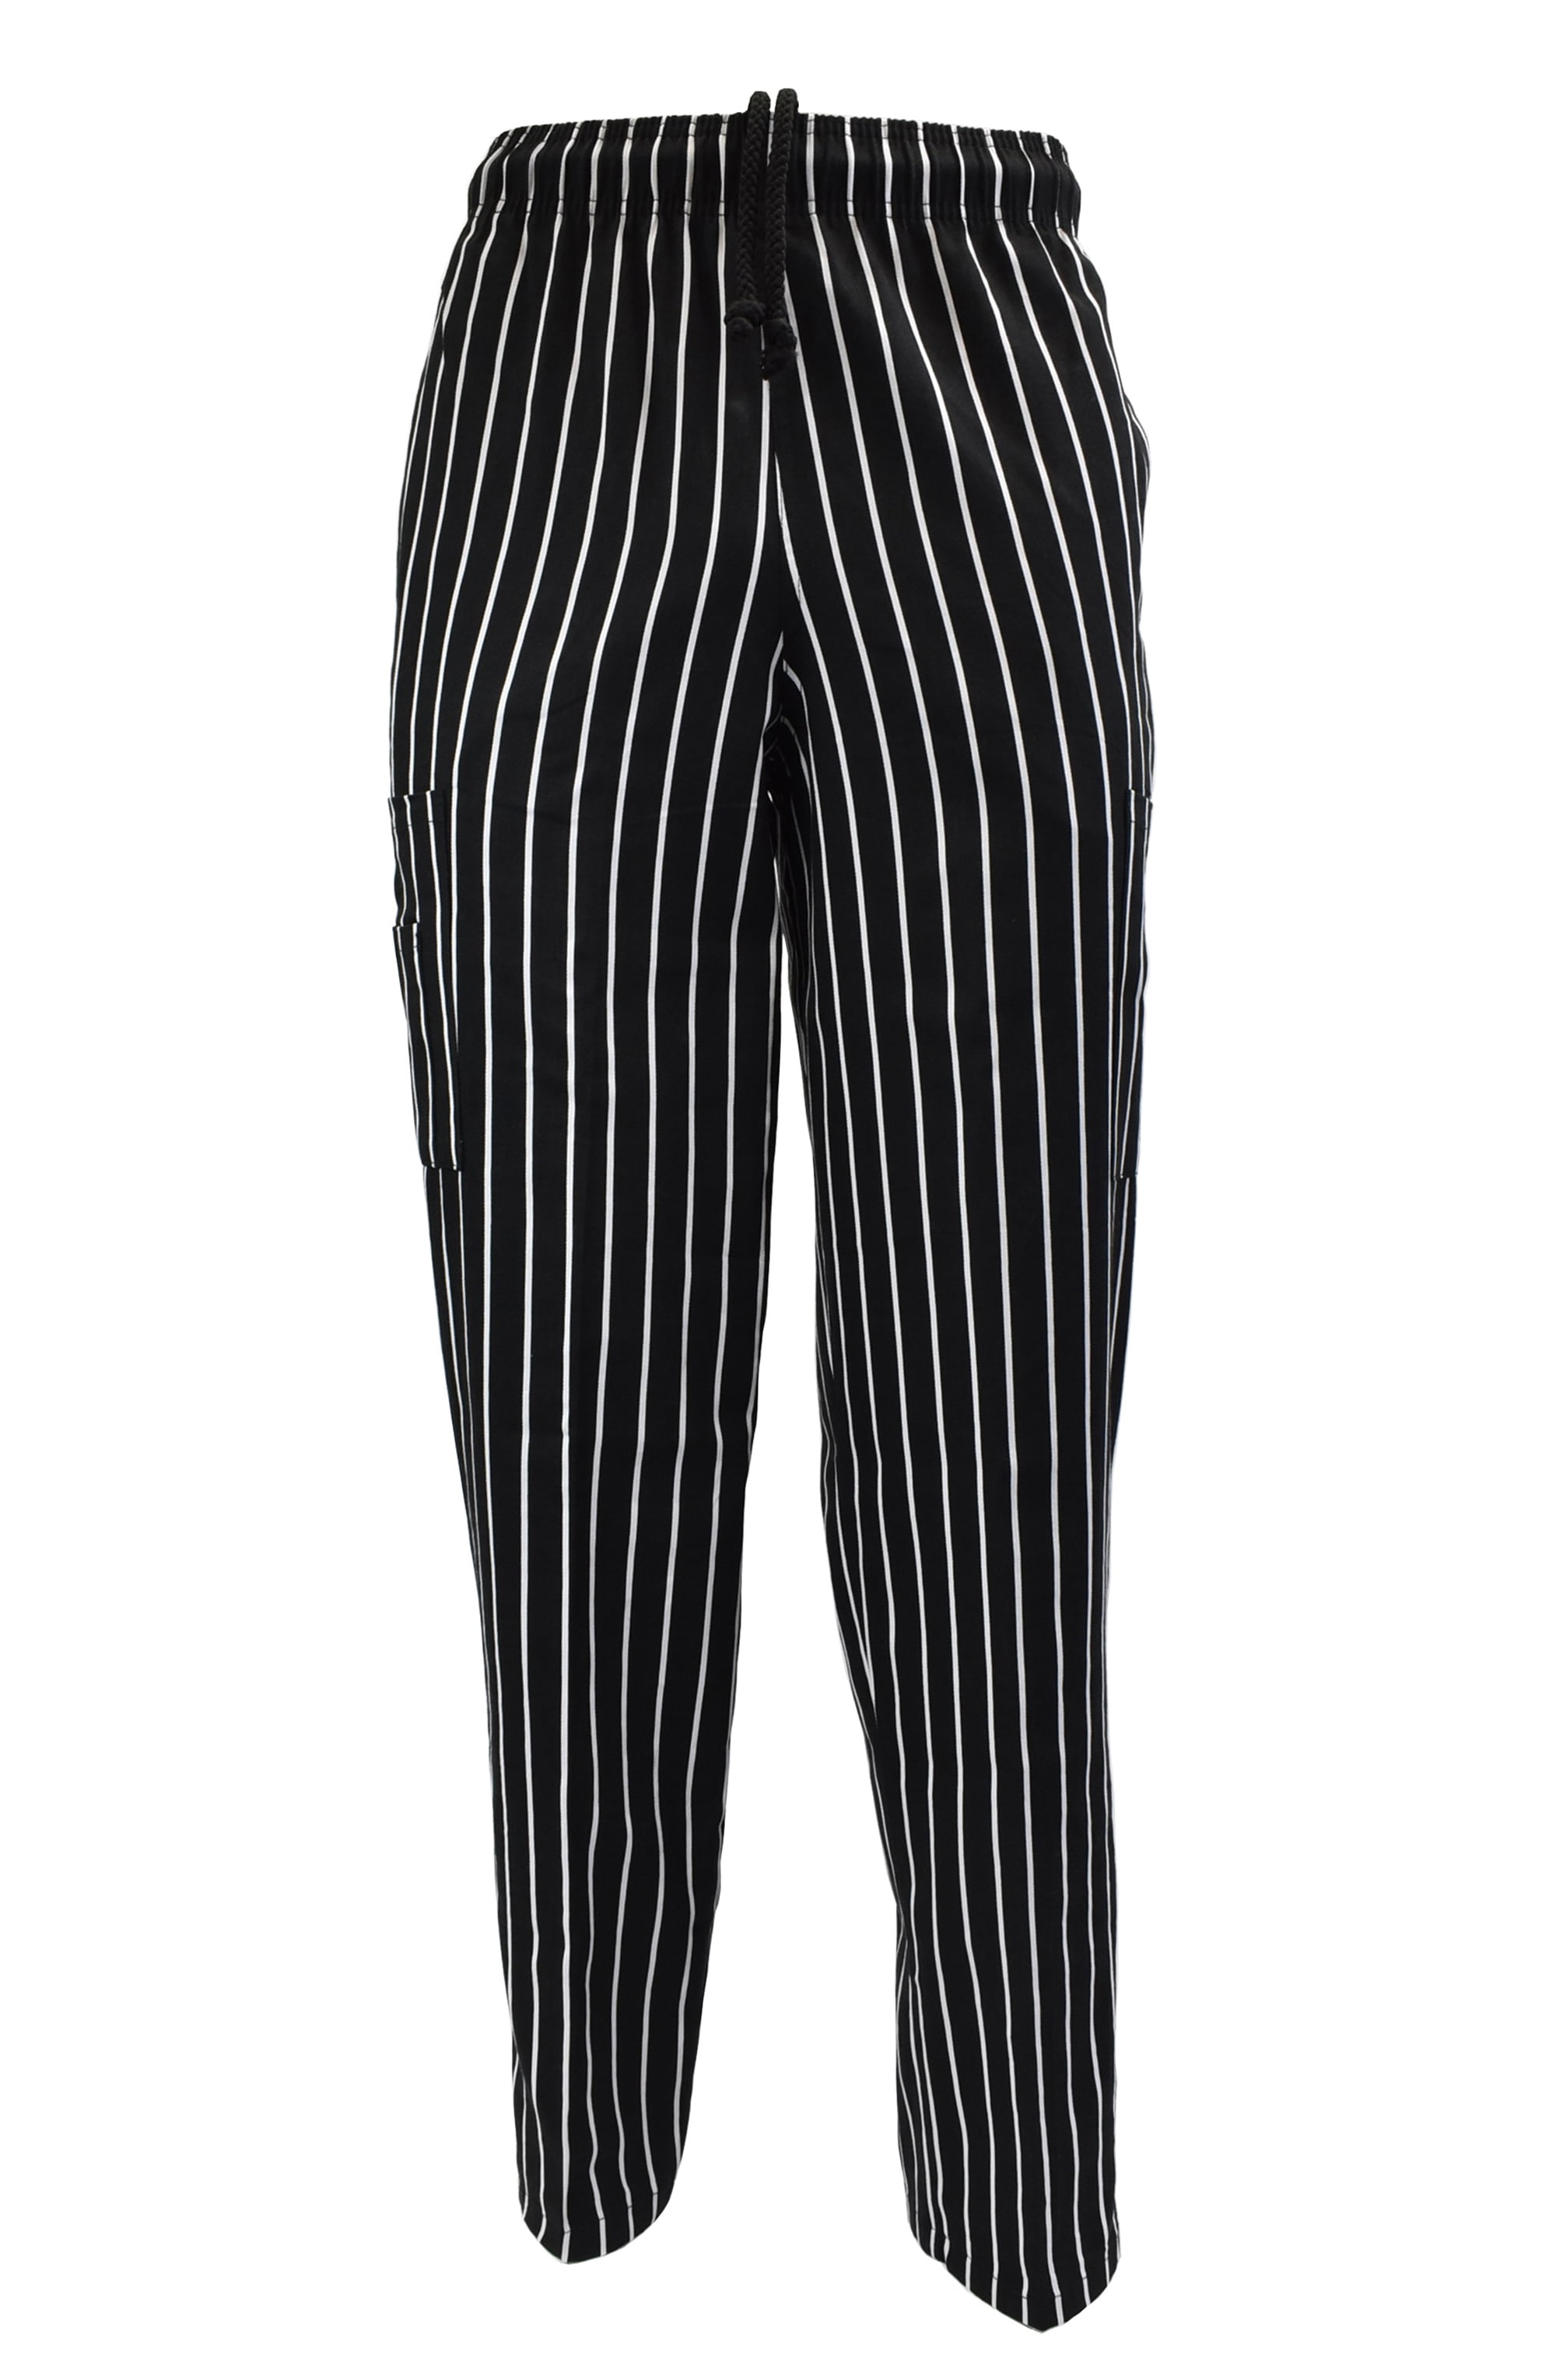 Men’s Black and White Checkerboard Print Chef Pants with Elastic Waist Drawstring Baggy Chef Uniforms 